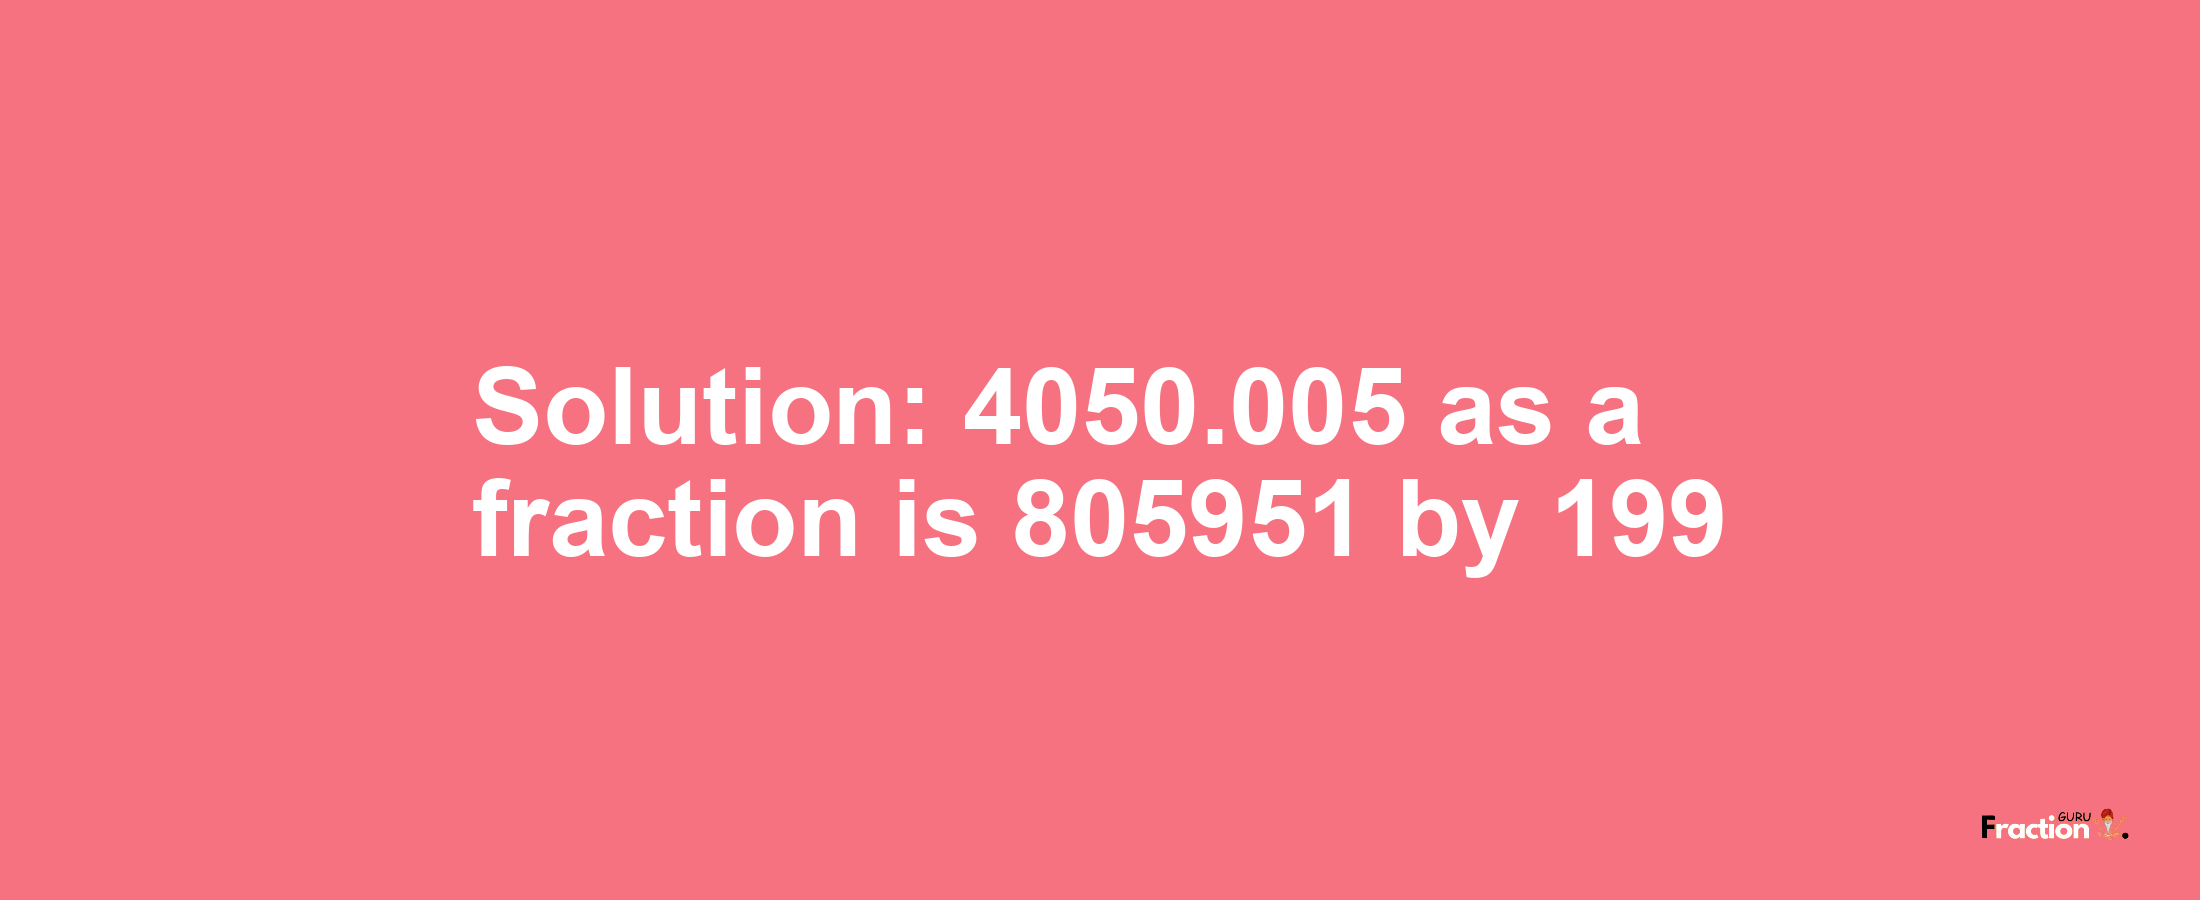 Solution:4050.005 as a fraction is 805951/199